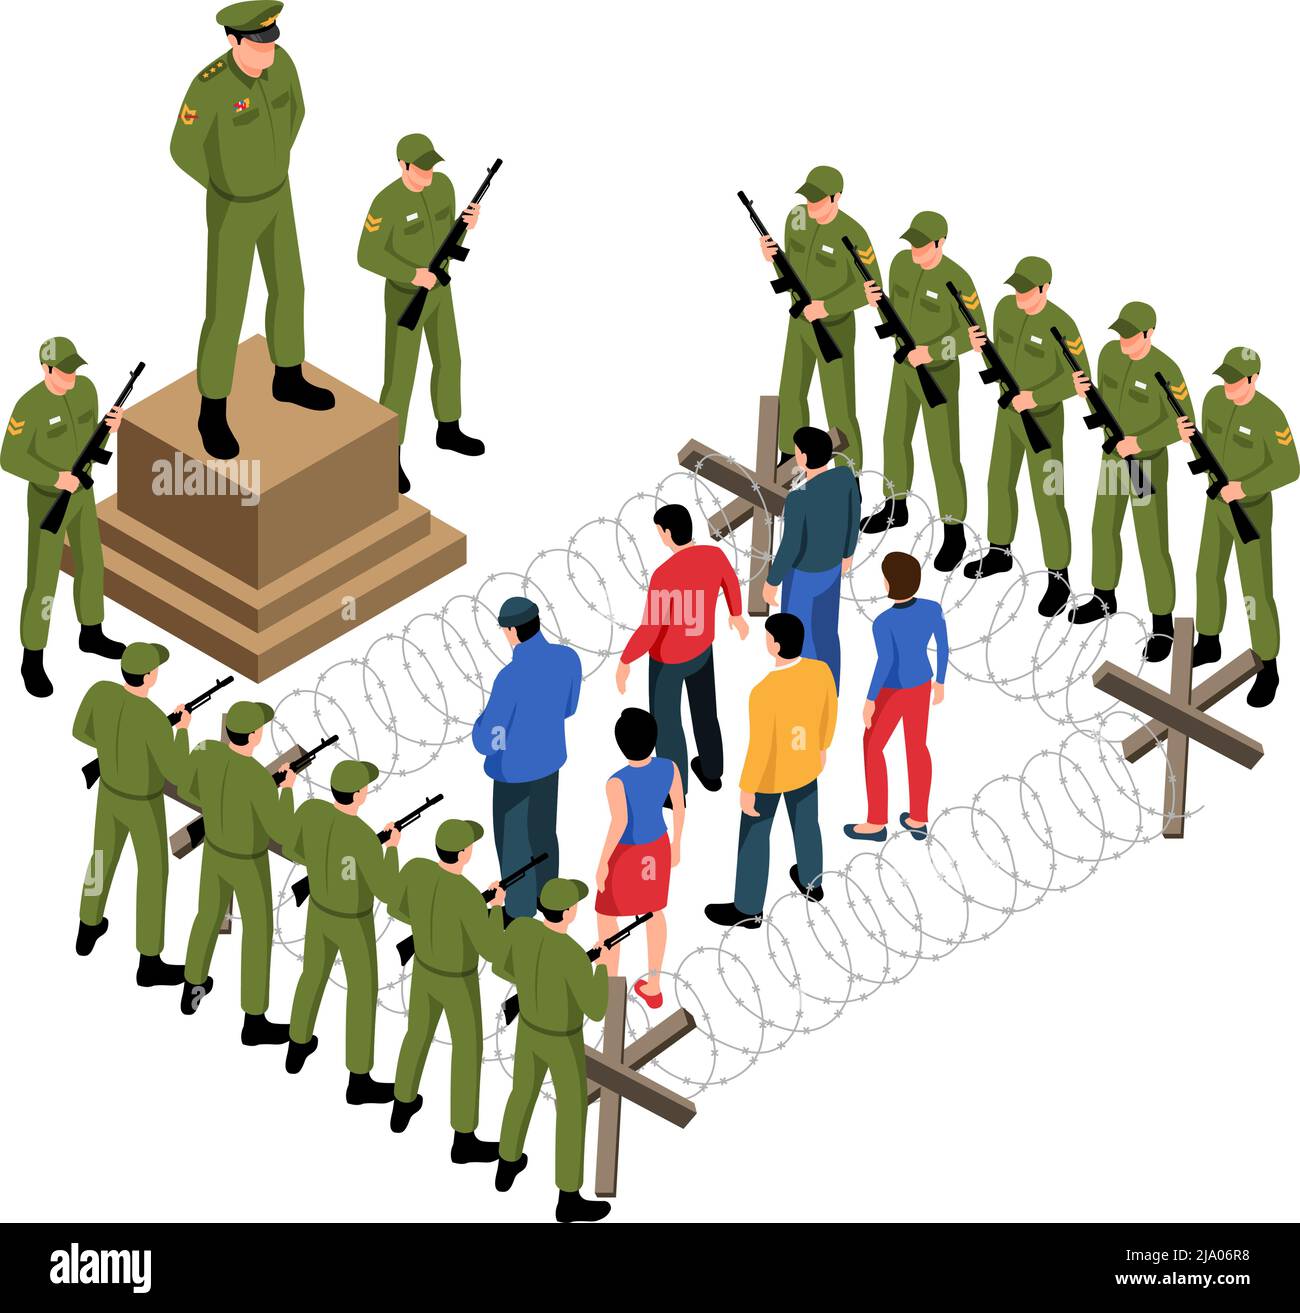 Political system isometric icon with soldiers surrounding dissidents behind barbed wire vector illustration Stock Vector